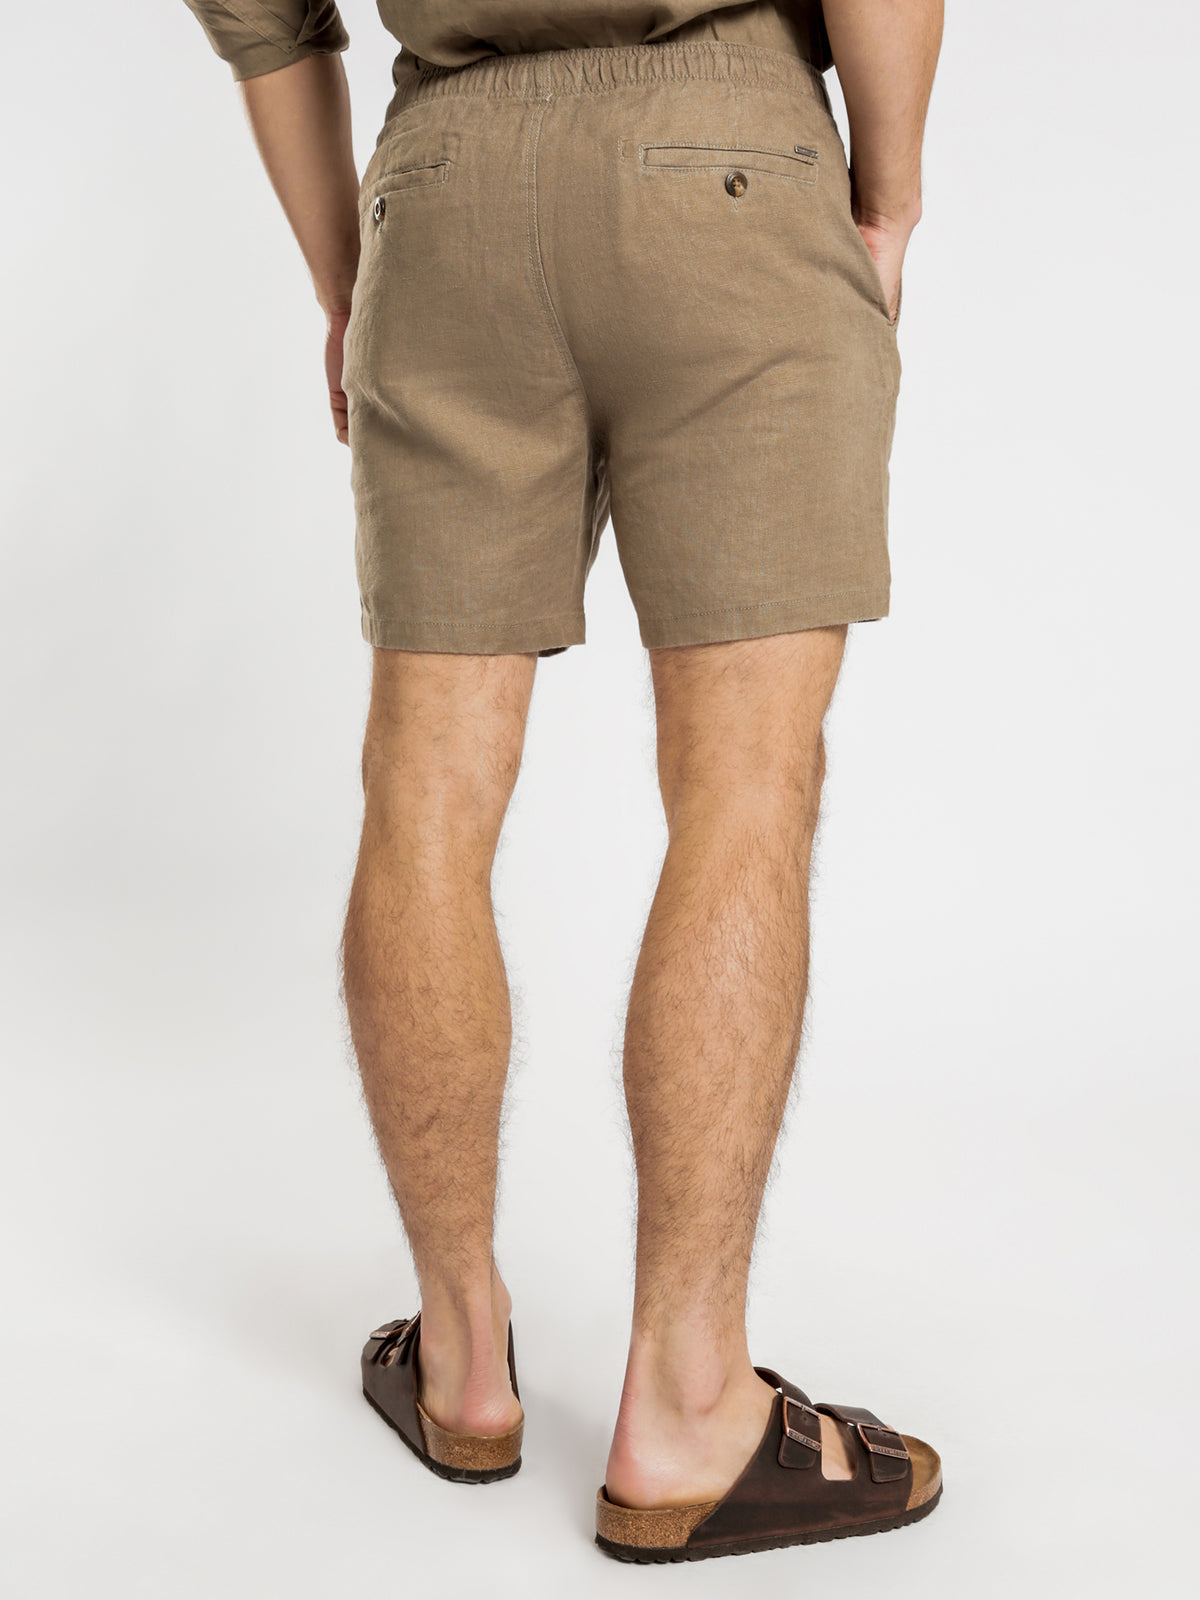 Nelson Linen Shorts in Thyme